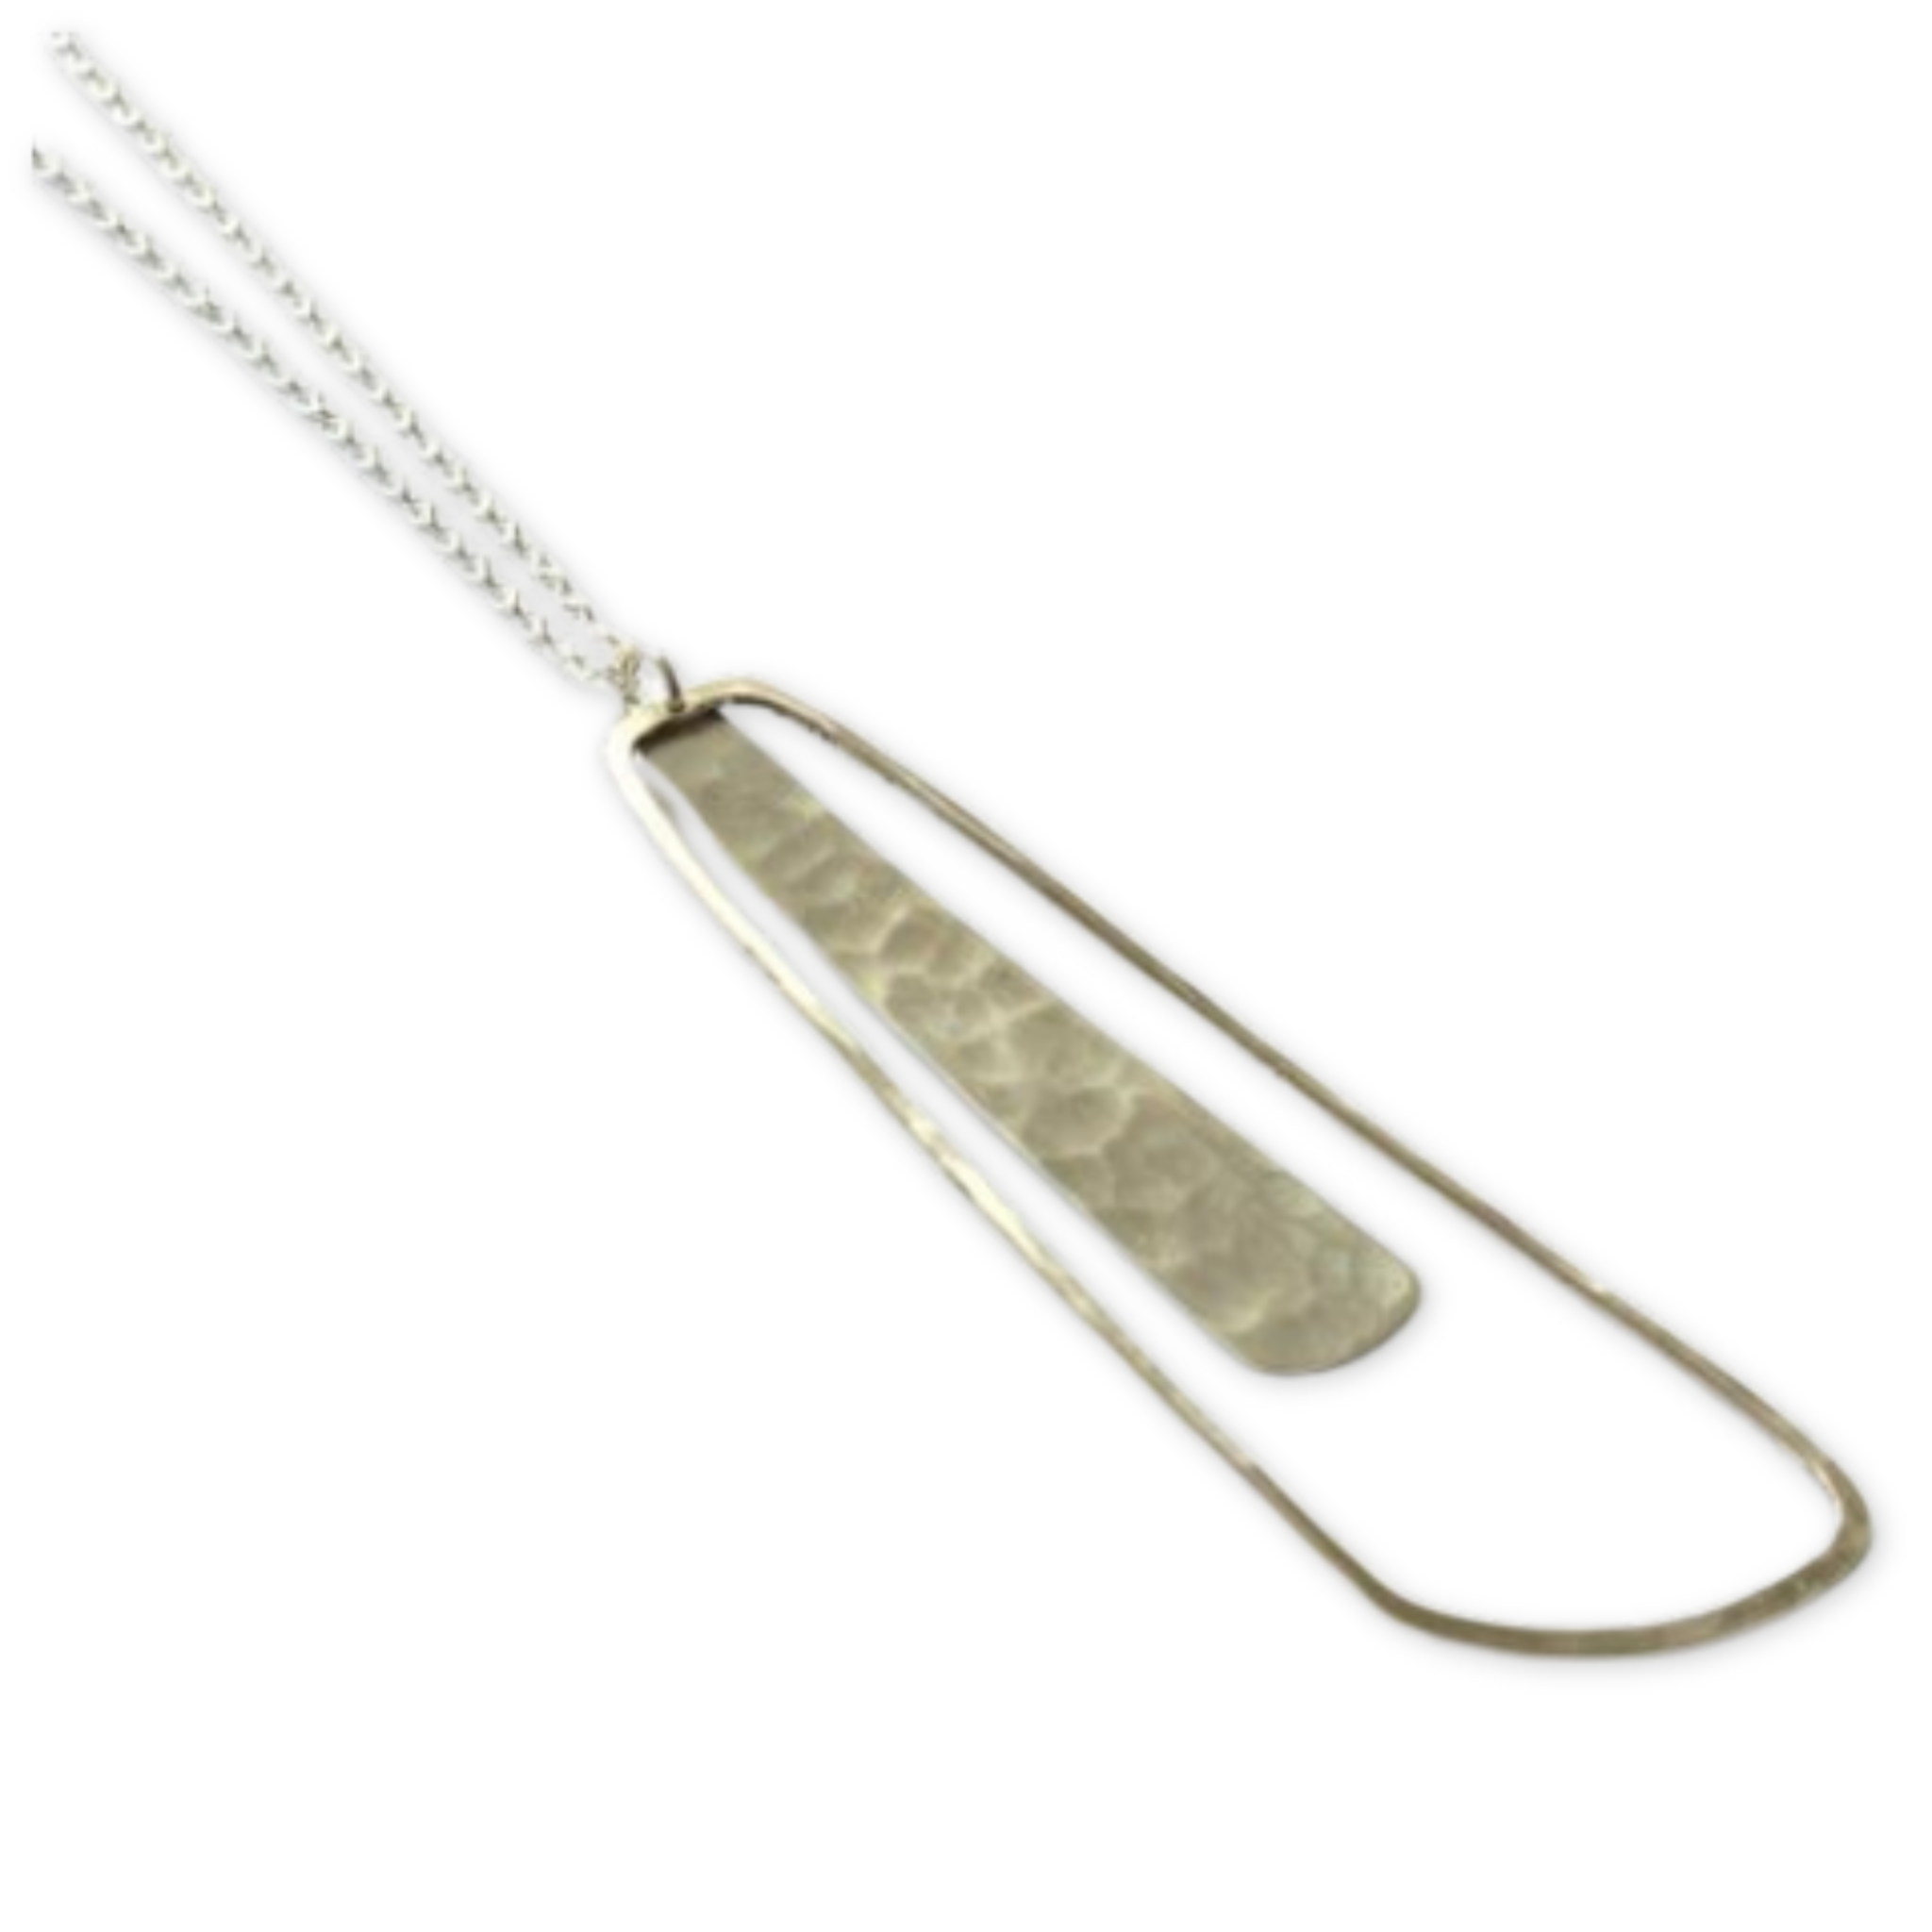 hammered abstract rectangle pendant hanging with a thin hammered open abstract rectangle and supported by a delicate necklace chain